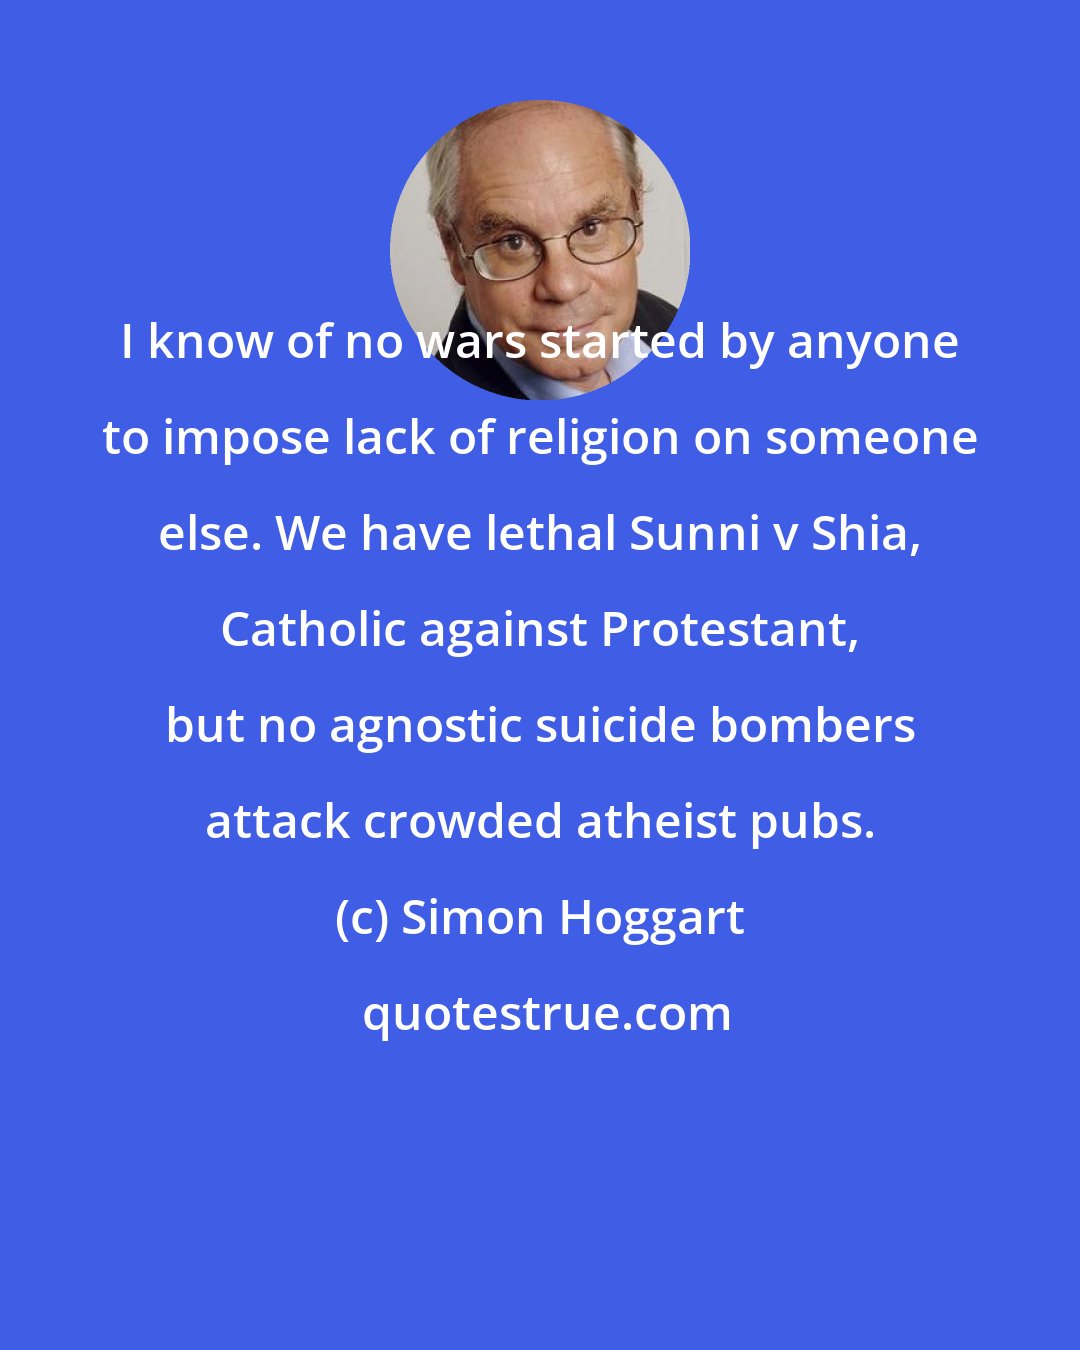 Simon Hoggart: I know of no wars started by anyone to impose lack of religion on someone else. We have lethal Sunni v Shia, Catholic against Protestant, but no agnostic suicide bombers attack crowded atheist pubs.